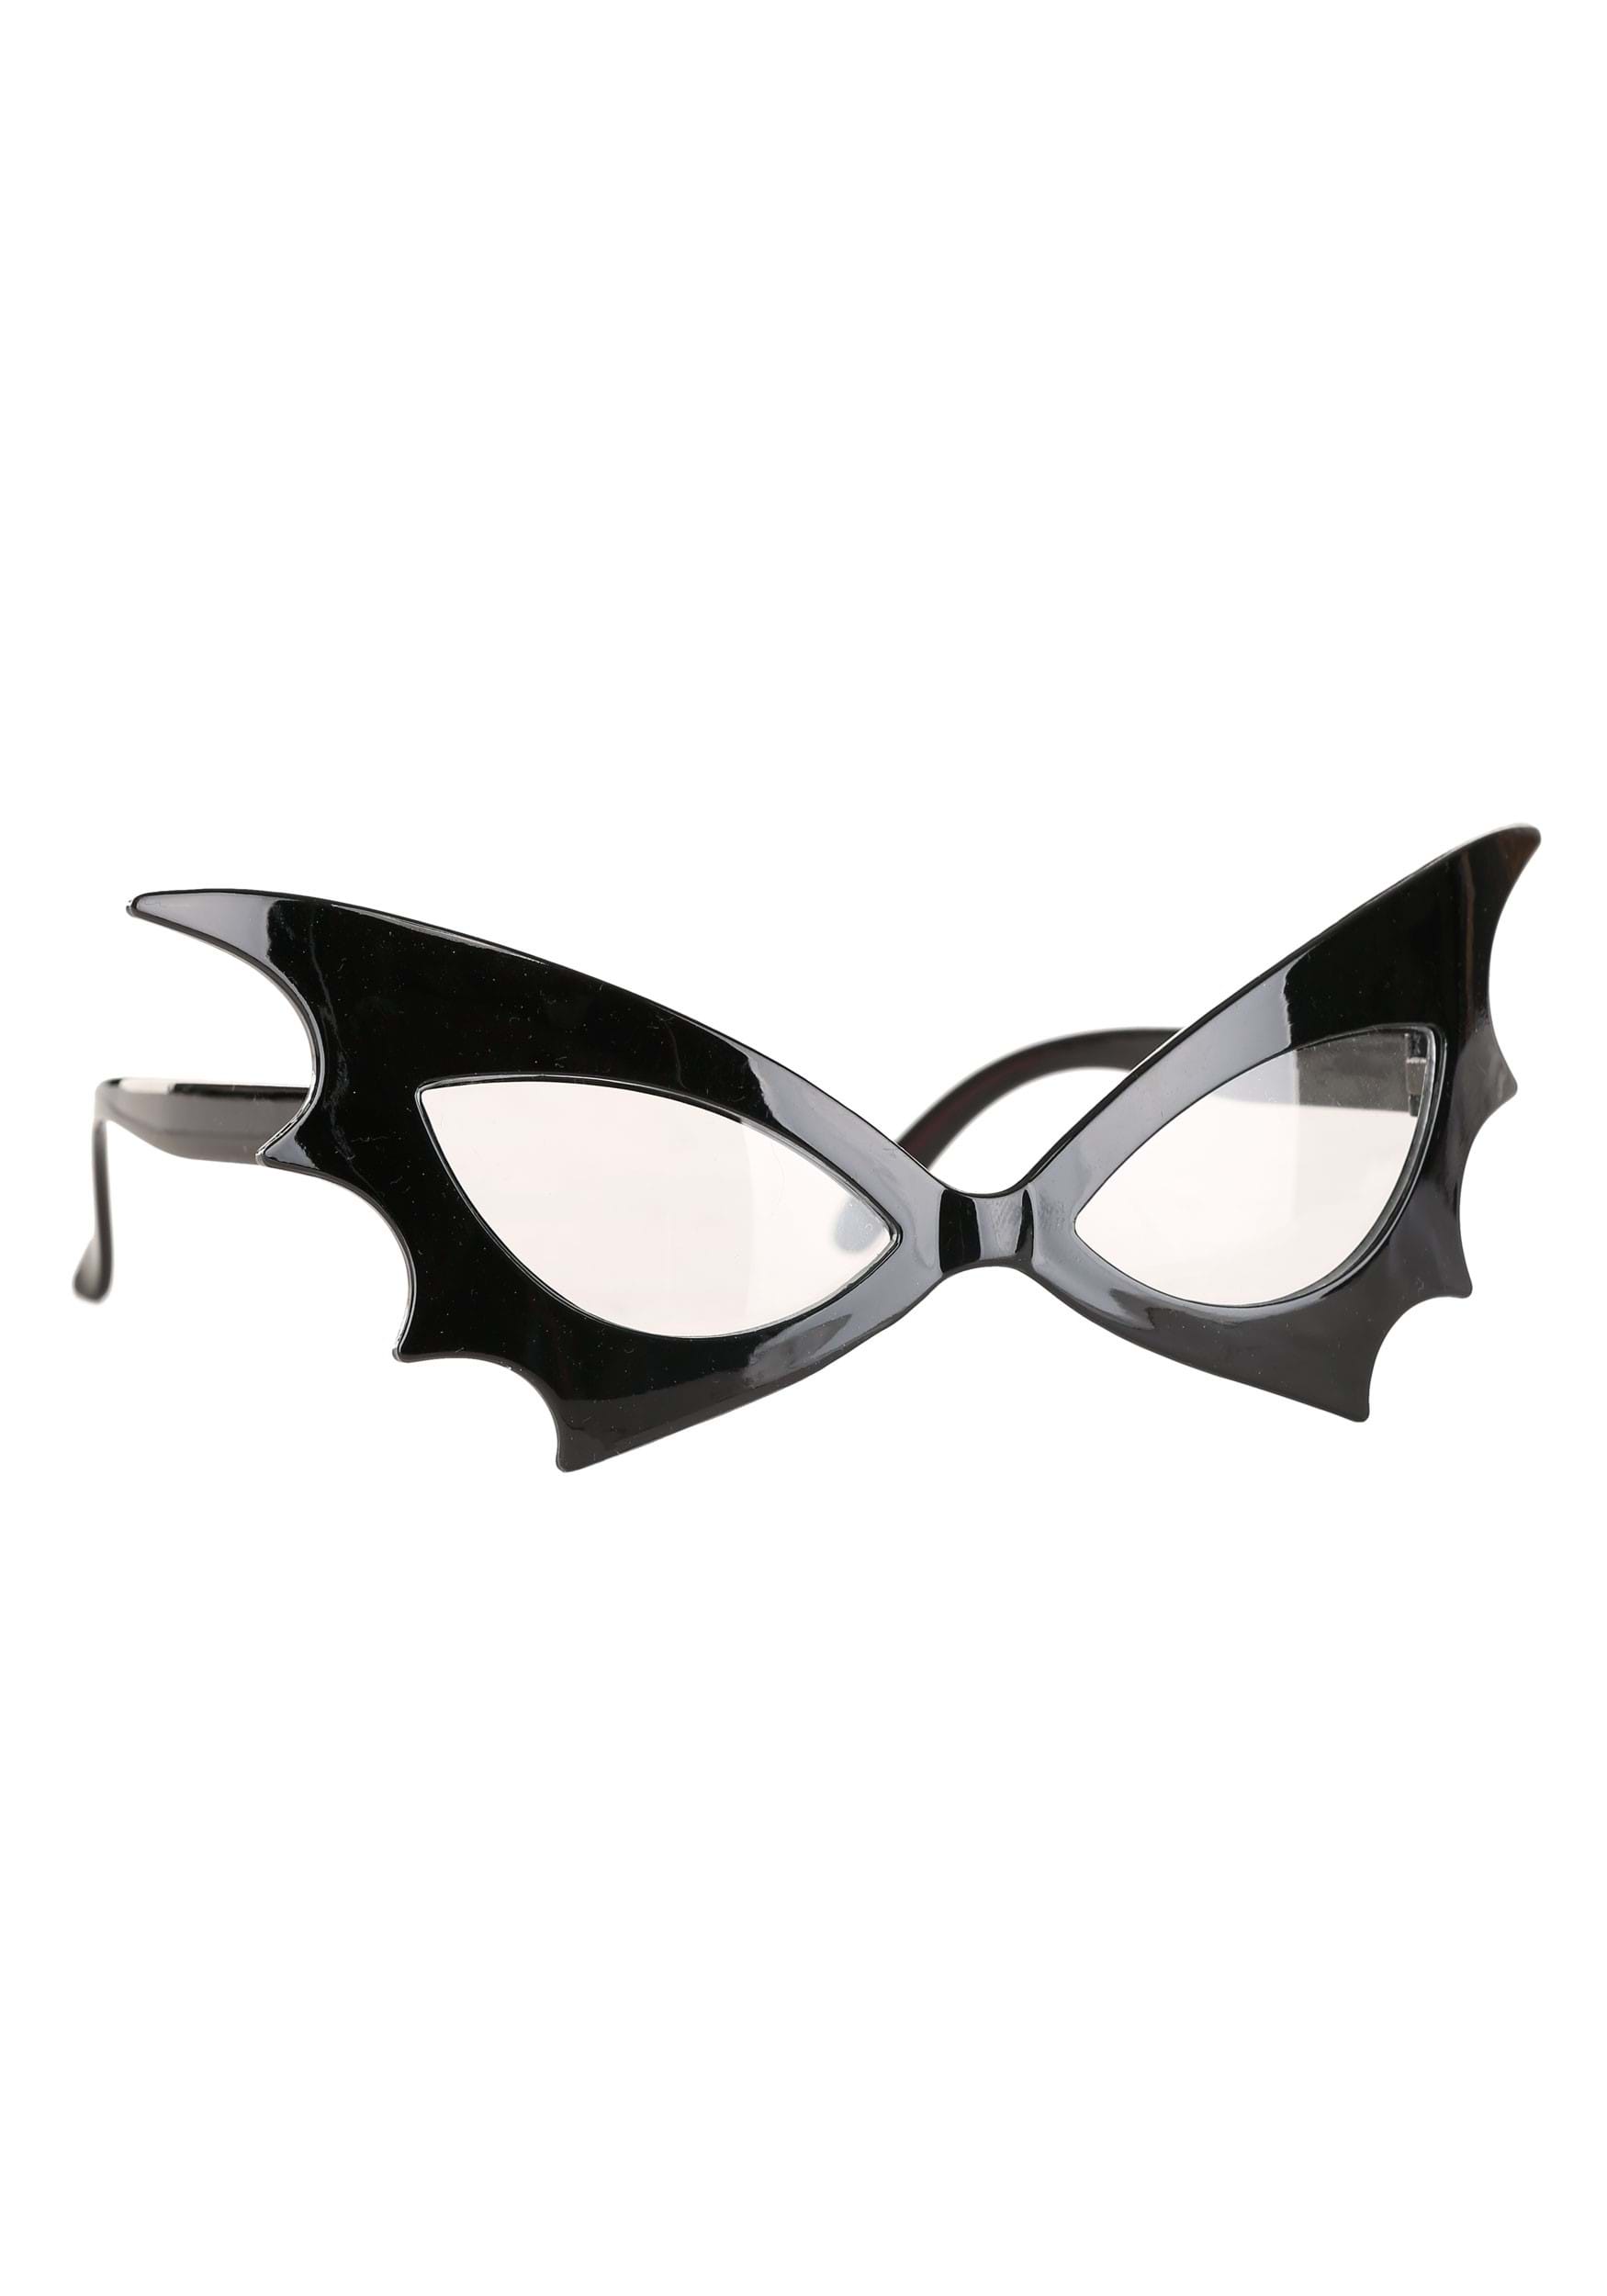 Wings Glasses For Adults